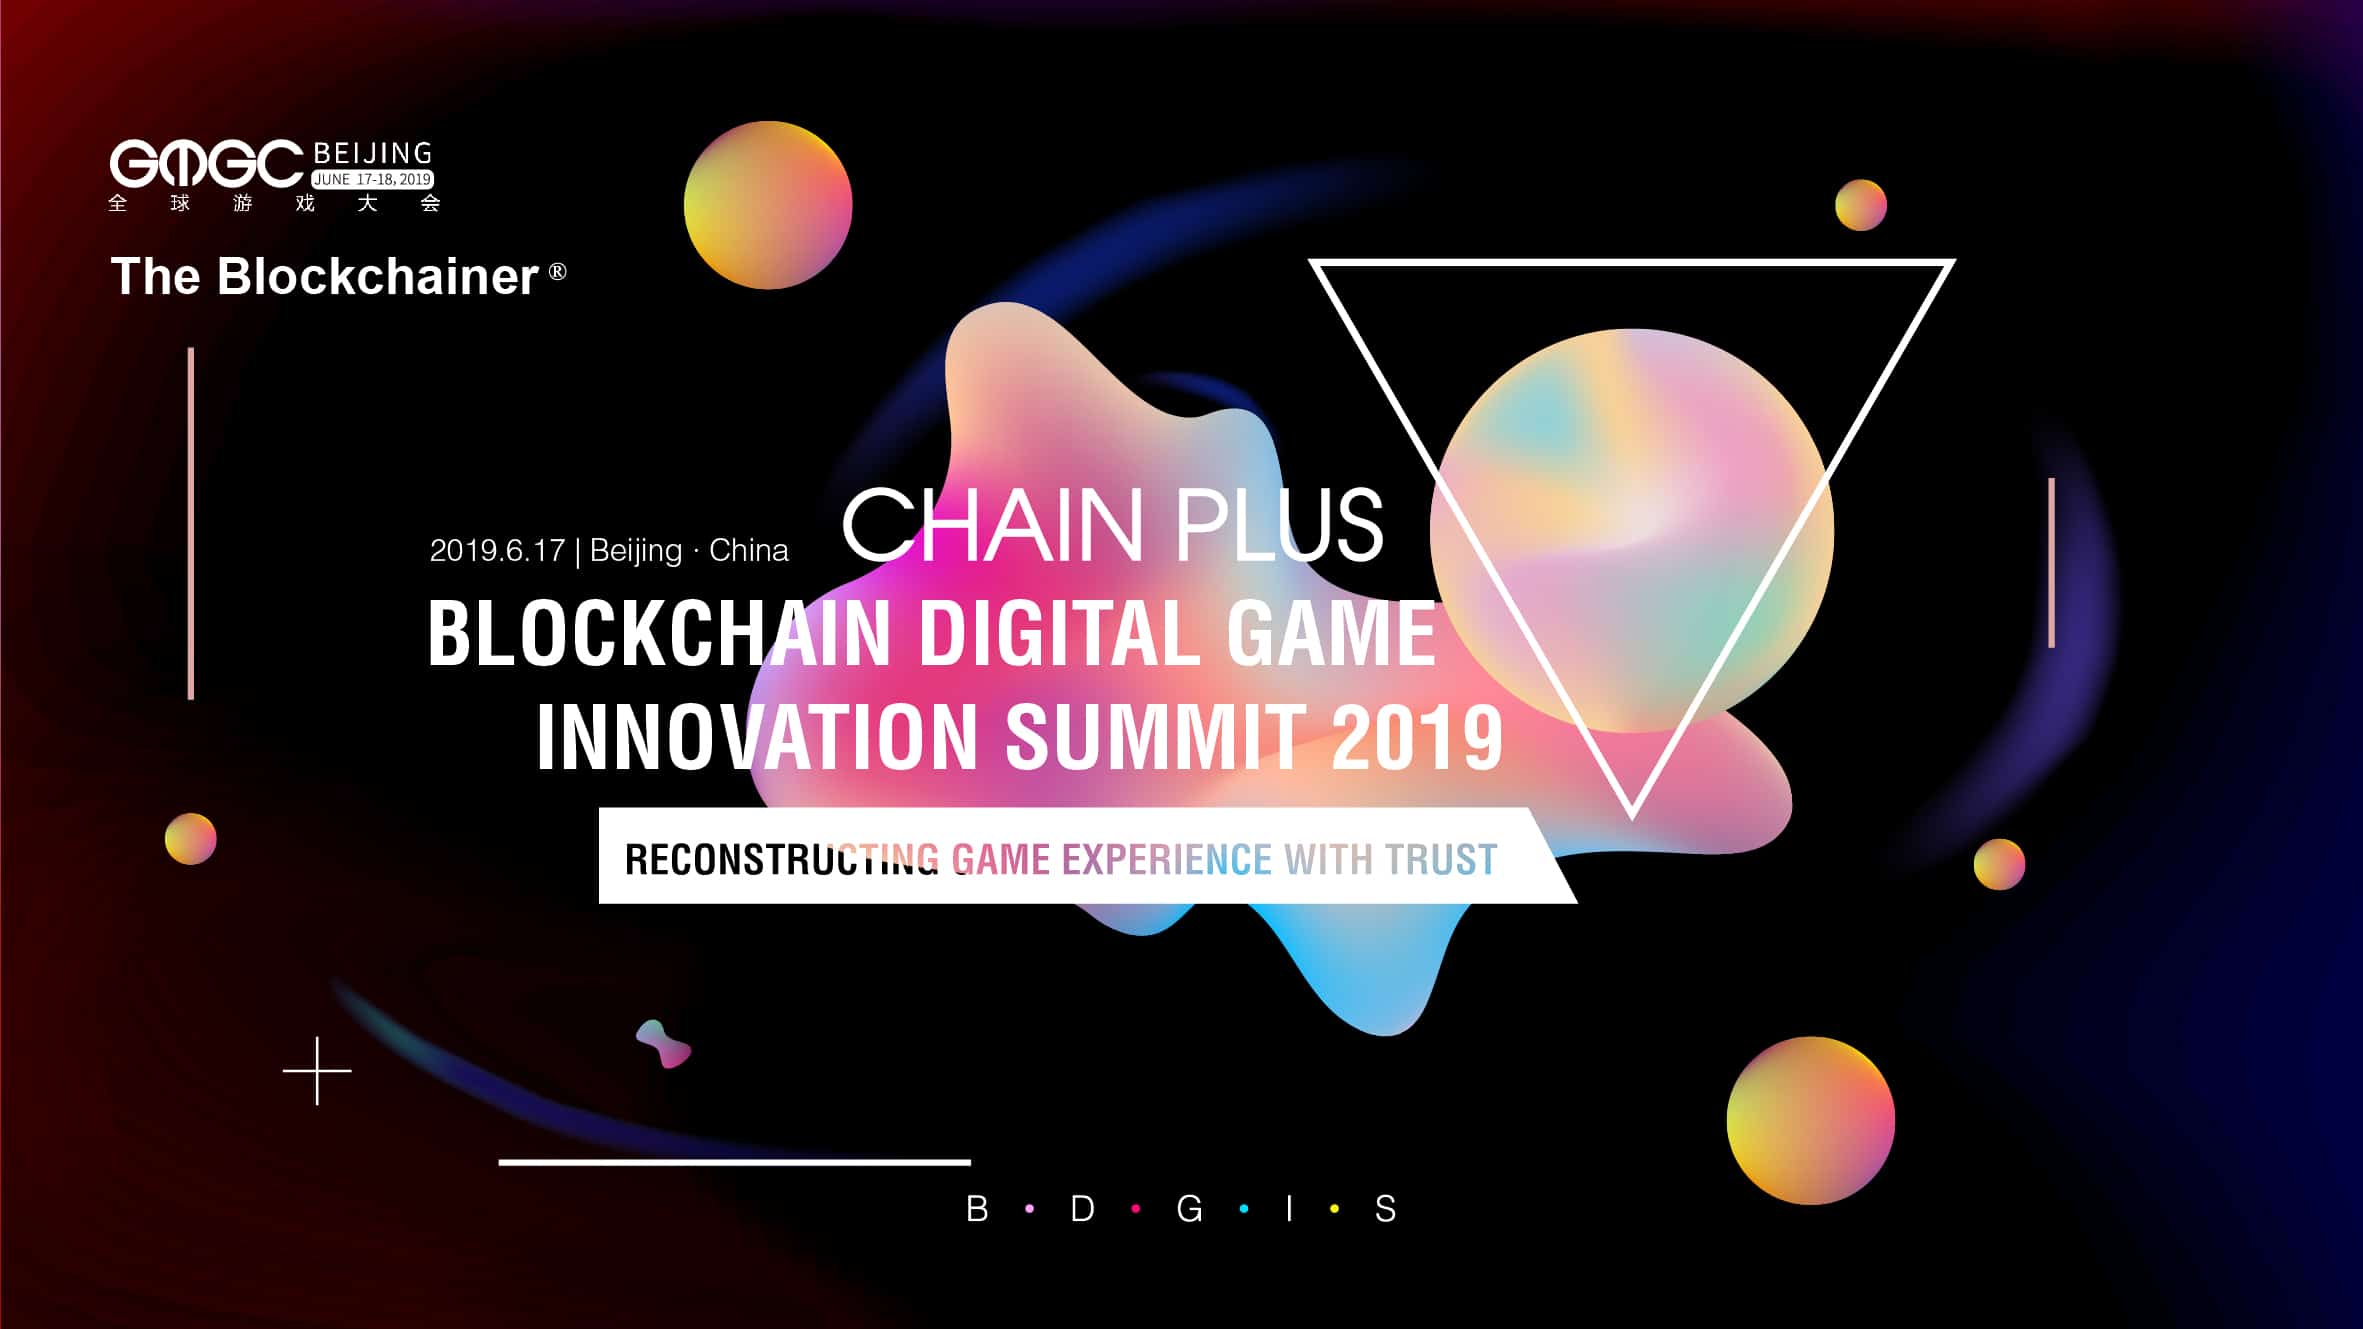 blockchain digital game summit Dekaron M is a PC MMORPG that was first released in 2004 and published by Nexon. Now, the game is being rebranded as Dekaron G as they plan to bring blockchain features into the game. 